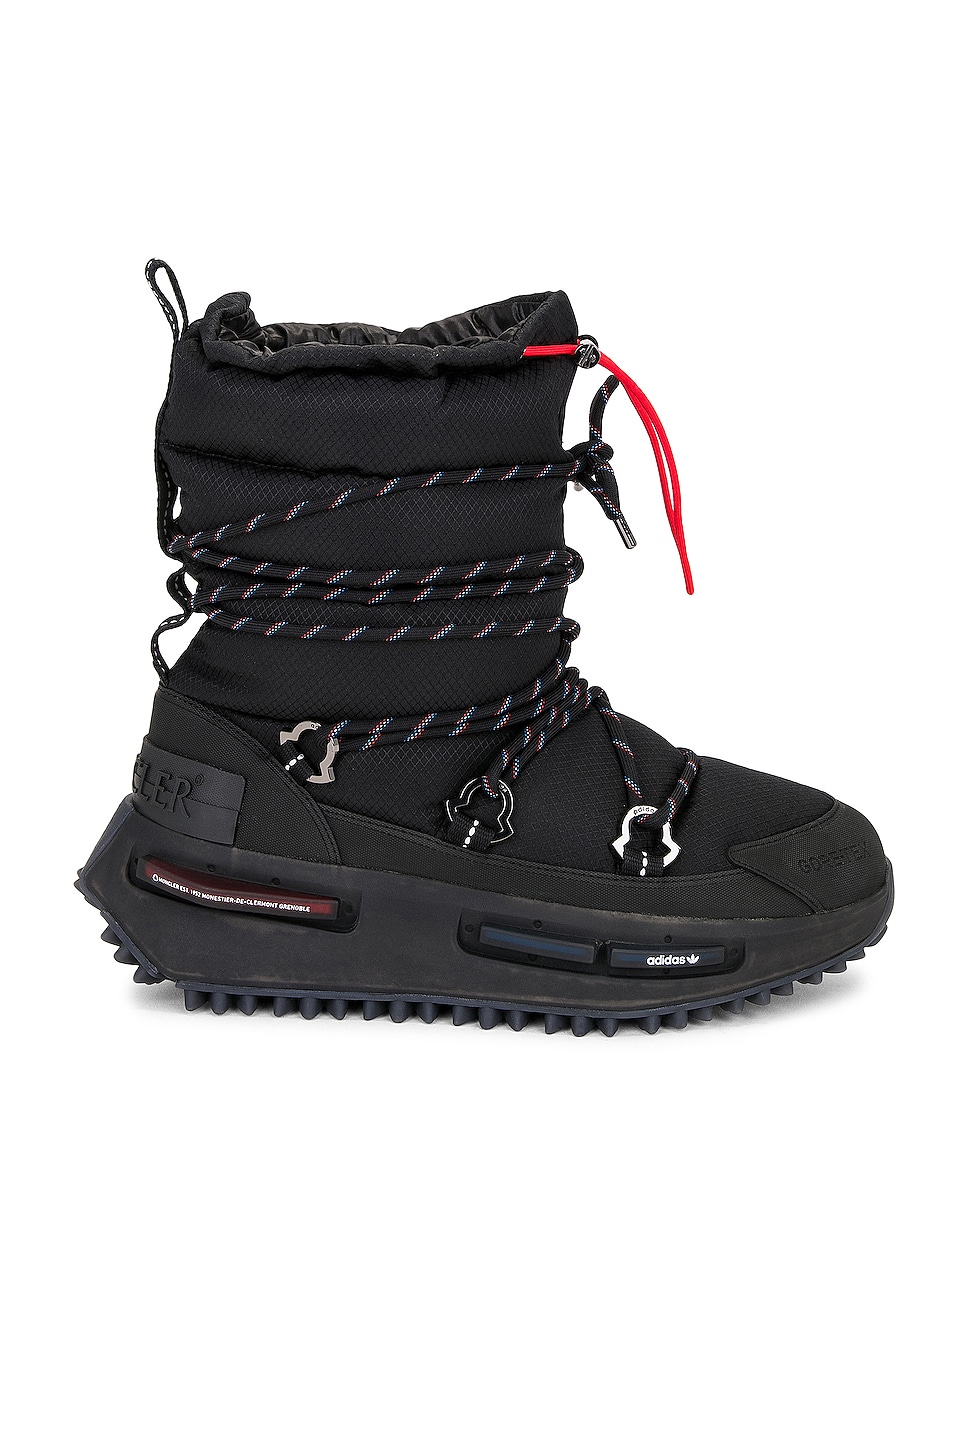 Image 1 of Moncler Genius x Adidas NMD Mid Ankle Boots in Black